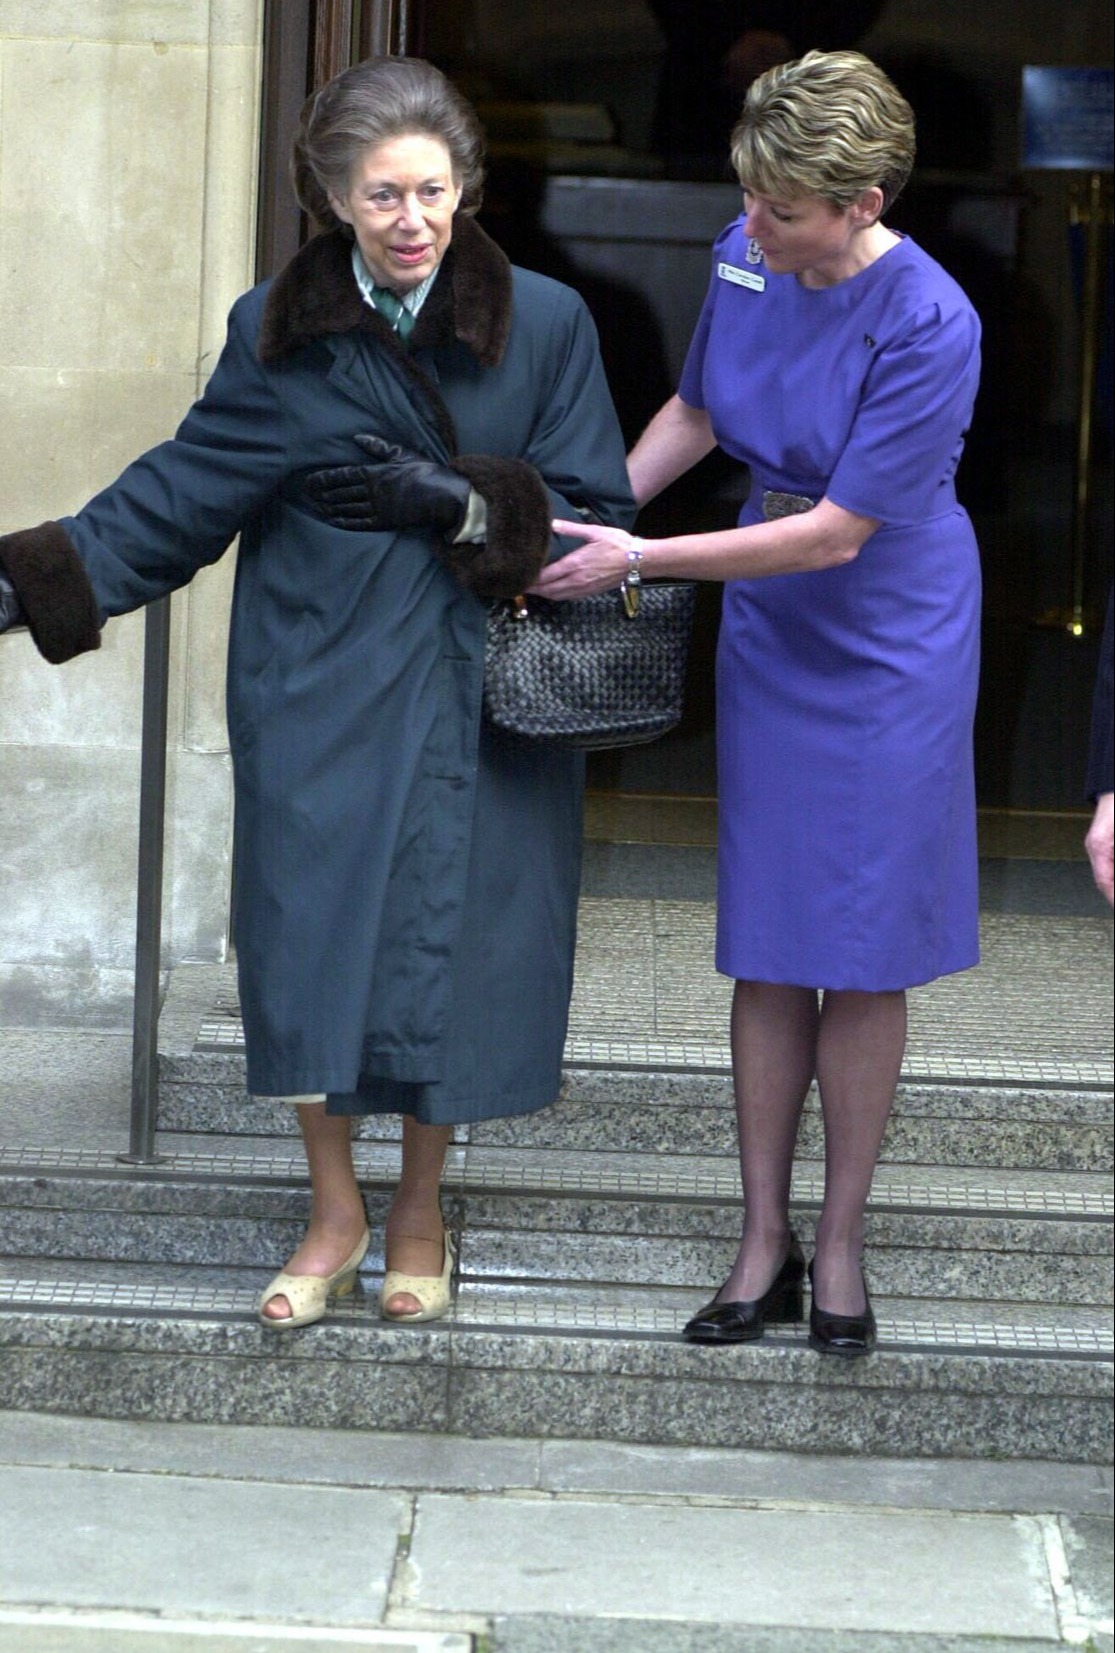 Margaret is helped down a flight of steps by a nurse as she leaves King Edward VII Hospital in London in January 2001